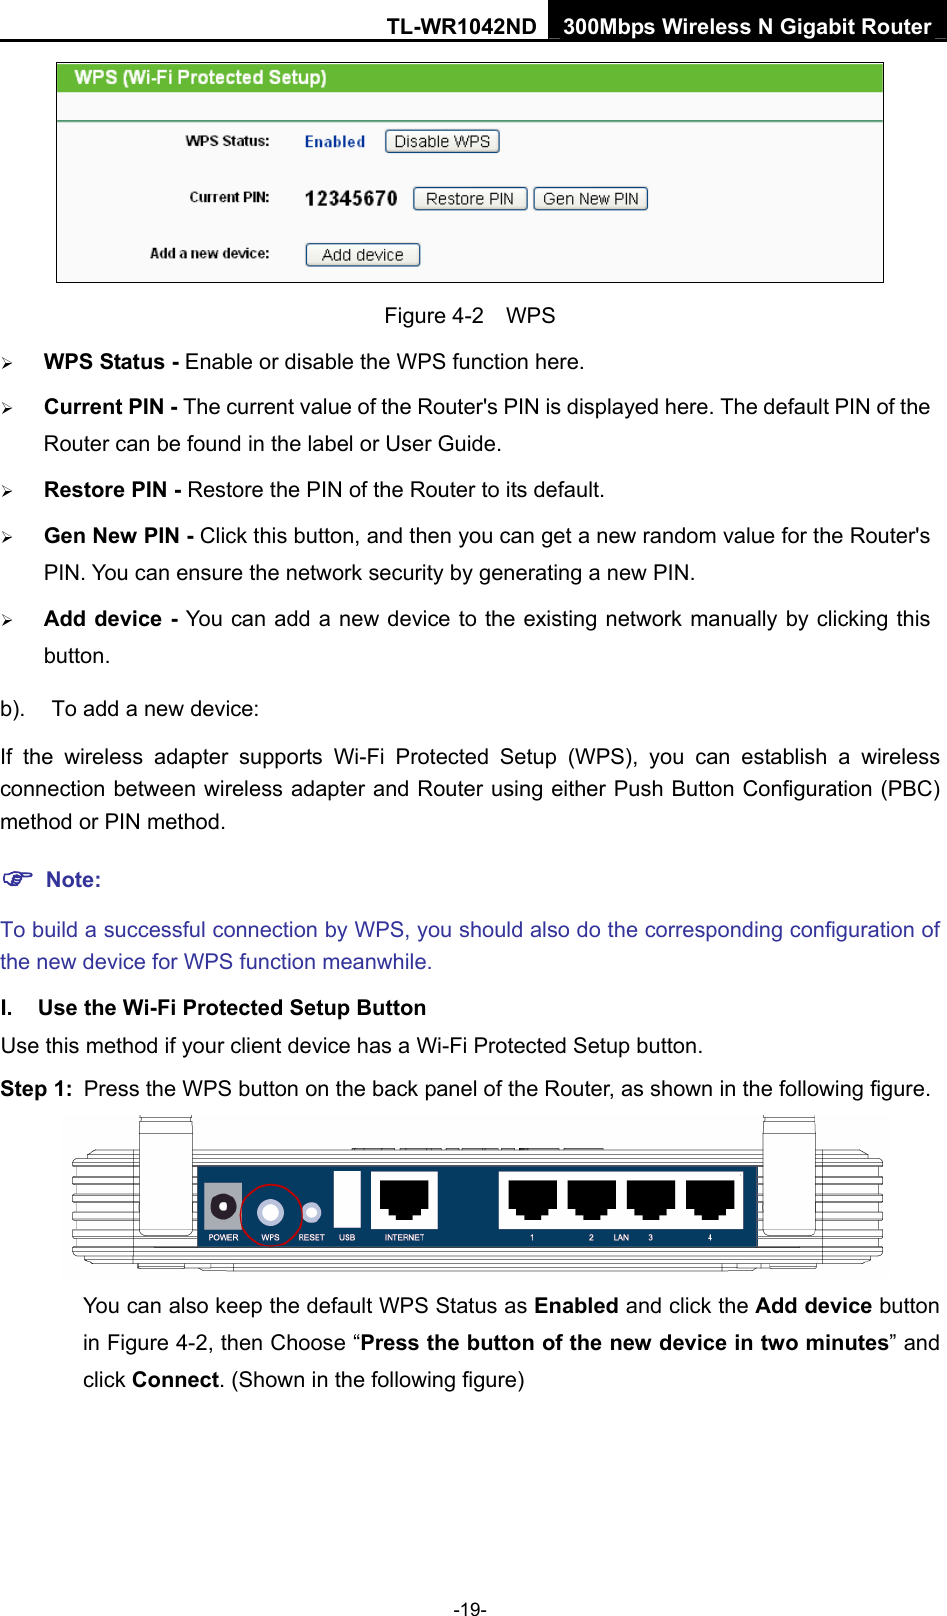 TL-WR1042ND 300Mbps Wireless N Gigabit Router -19-  Figure 4-2  WPS ¾ WPS Status - Enable or disable the WPS function here.   ¾ Current PIN - The current value of the Router&apos;s PIN is displayed here. The default PIN of the Router can be found in the label or User Guide.   ¾ Restore PIN - Restore the PIN of the Router to its default.   ¾ Gen New PIN - Click this button, and then you can get a new random value for the Router&apos;s PIN. You can ensure the network security by generating a new PIN.   ¾ Add device - You can add a new device to the existing network manually by clicking this button.  b).  To add a new device: If the wireless adapter supports Wi-Fi Protected Setup (WPS), you can establish a wireless connection between wireless adapter and Router using either Push Button Configuration (PBC) method or PIN method. ) Note: To build a successful connection by WPS, you should also do the corresponding configuration of the new device for WPS function meanwhile. I.  Use the Wi-Fi Protected Setup Button Use this method if your client device has a Wi-Fi Protected Setup button. Step 1:  Press the WPS button on the back panel of the Router, as shown in the following figure.    You can also keep the default WPS Status as Enabled and click the Add device button in Figure 4-2, then Choose “Press the button of the new device in two minutes” and click Connect. (Shown in the following figure) 